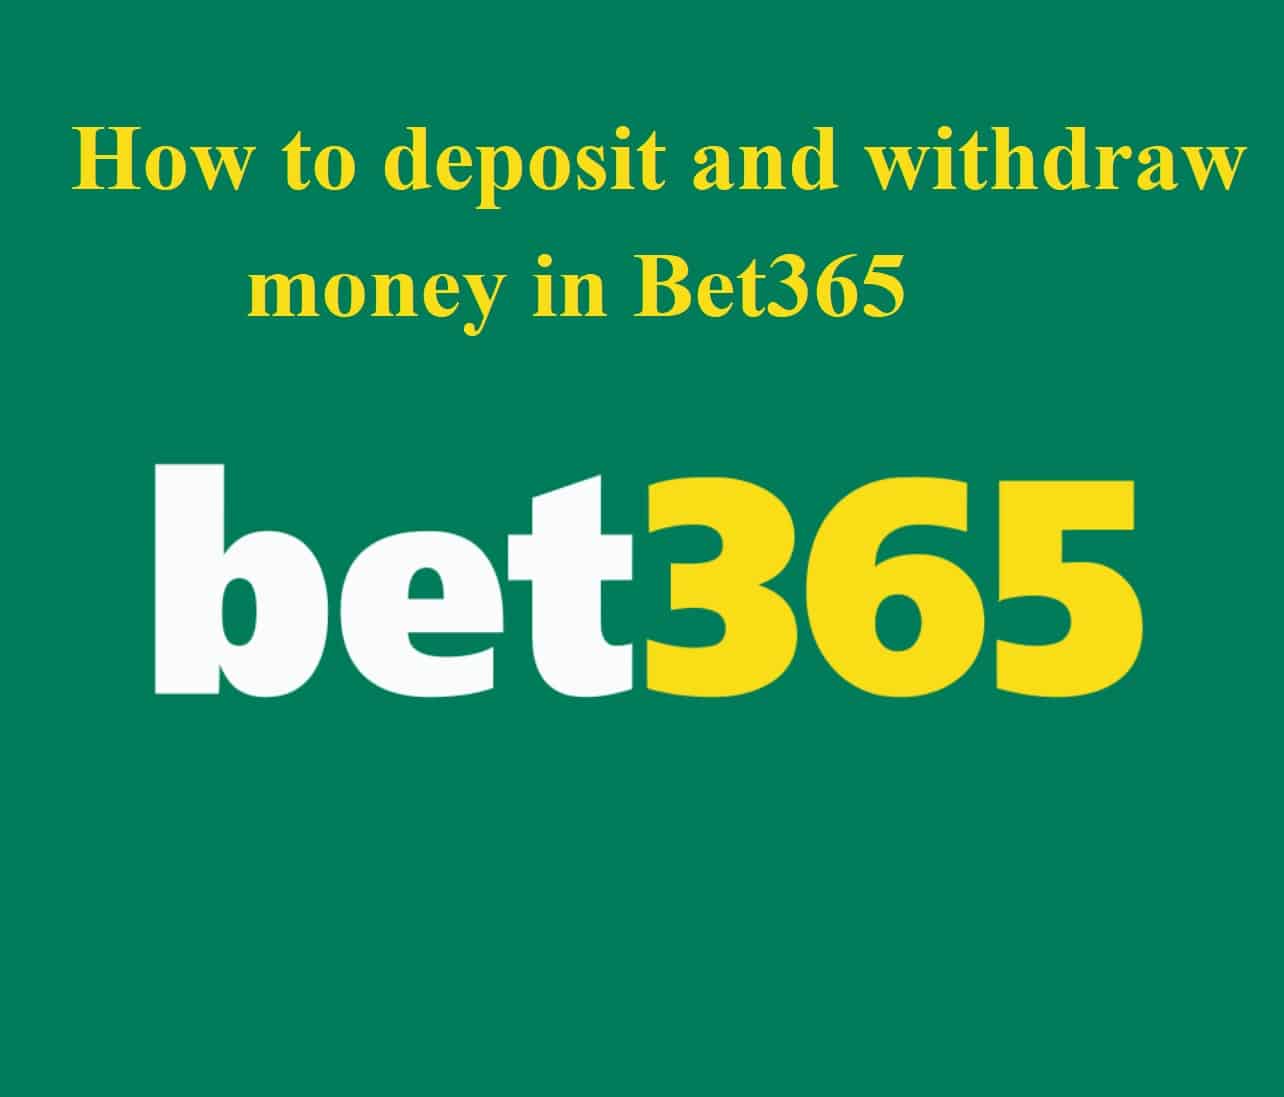 How to deposit and withdraw your money in Bet365 bookmaker